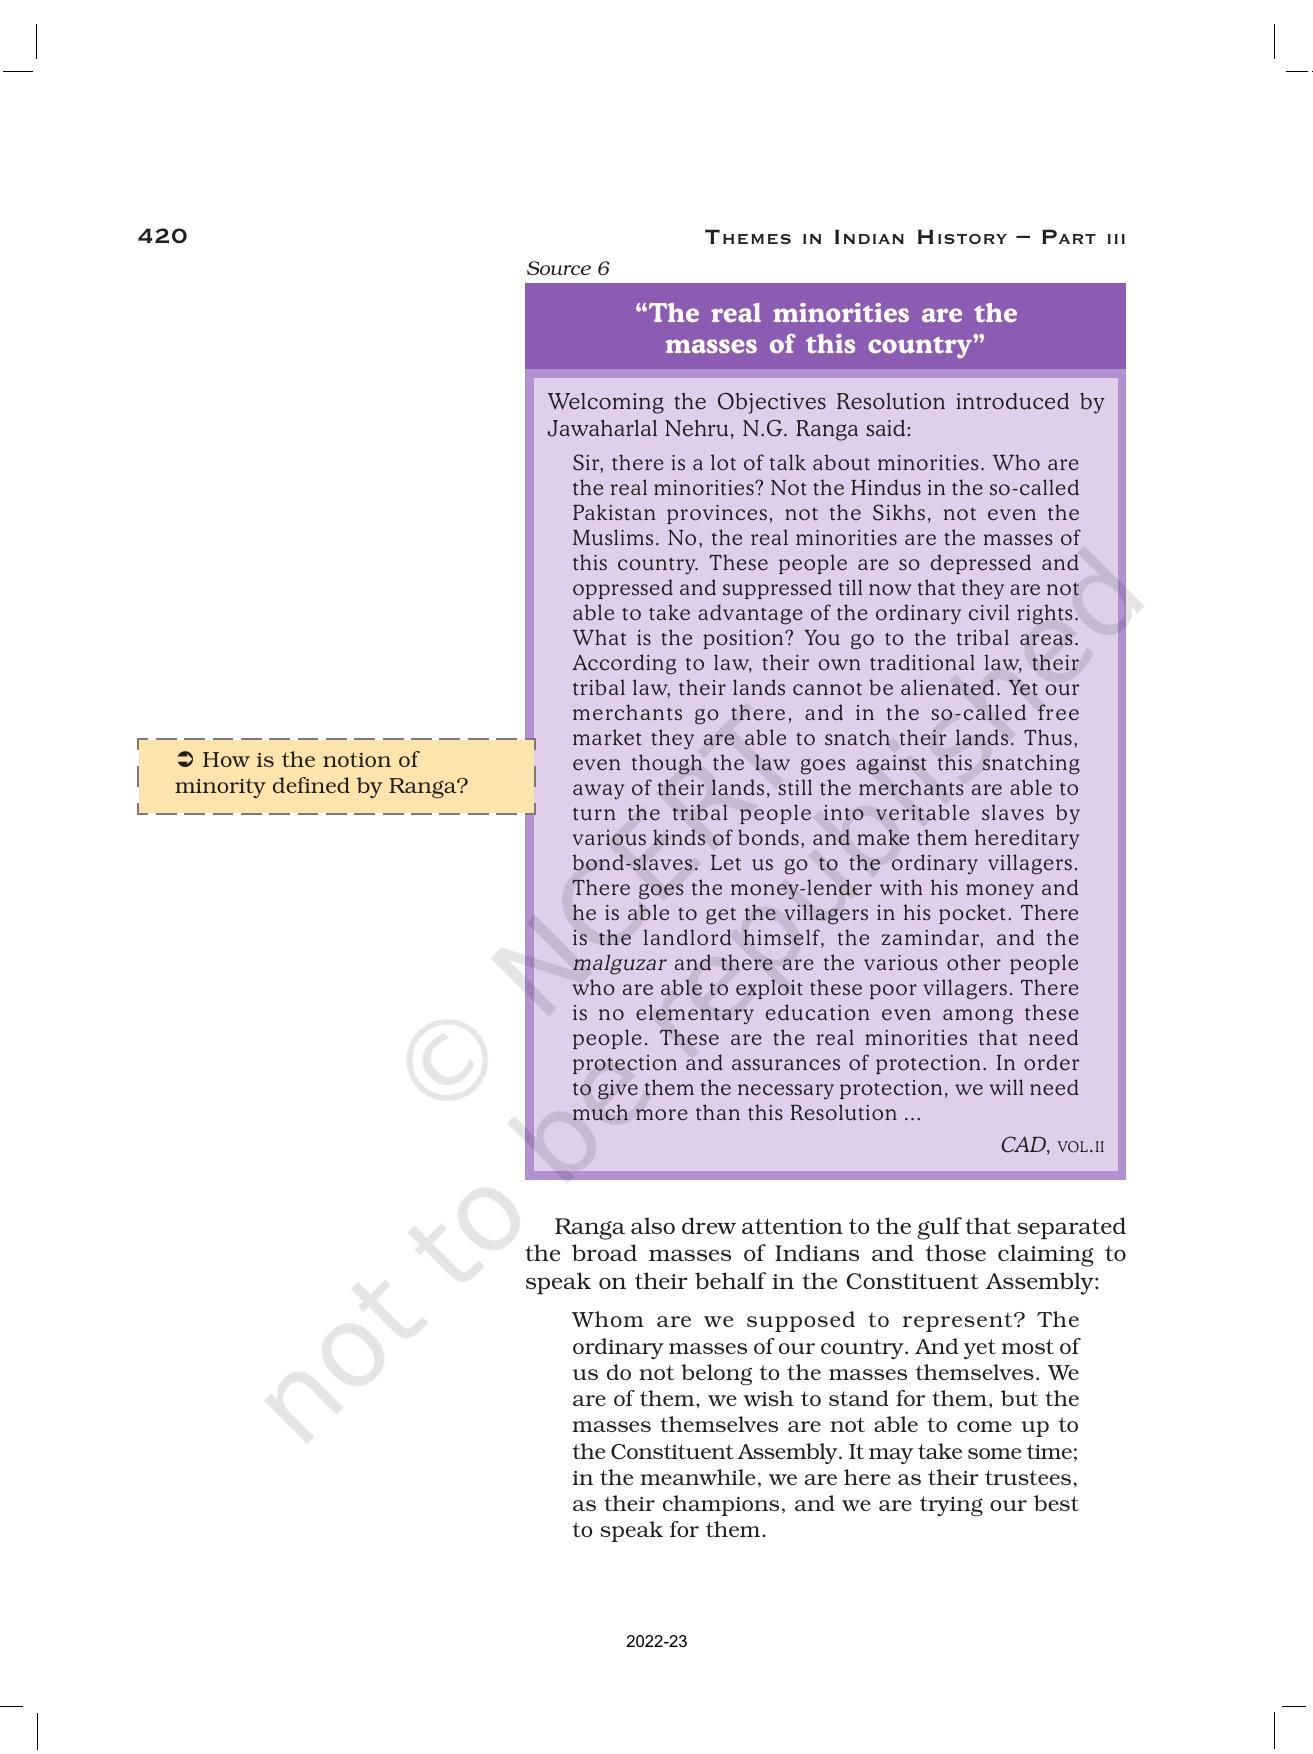 NCERT Book for Class 12 History (Part-III) Chapter 15 Framing and the Constitution - Page 16